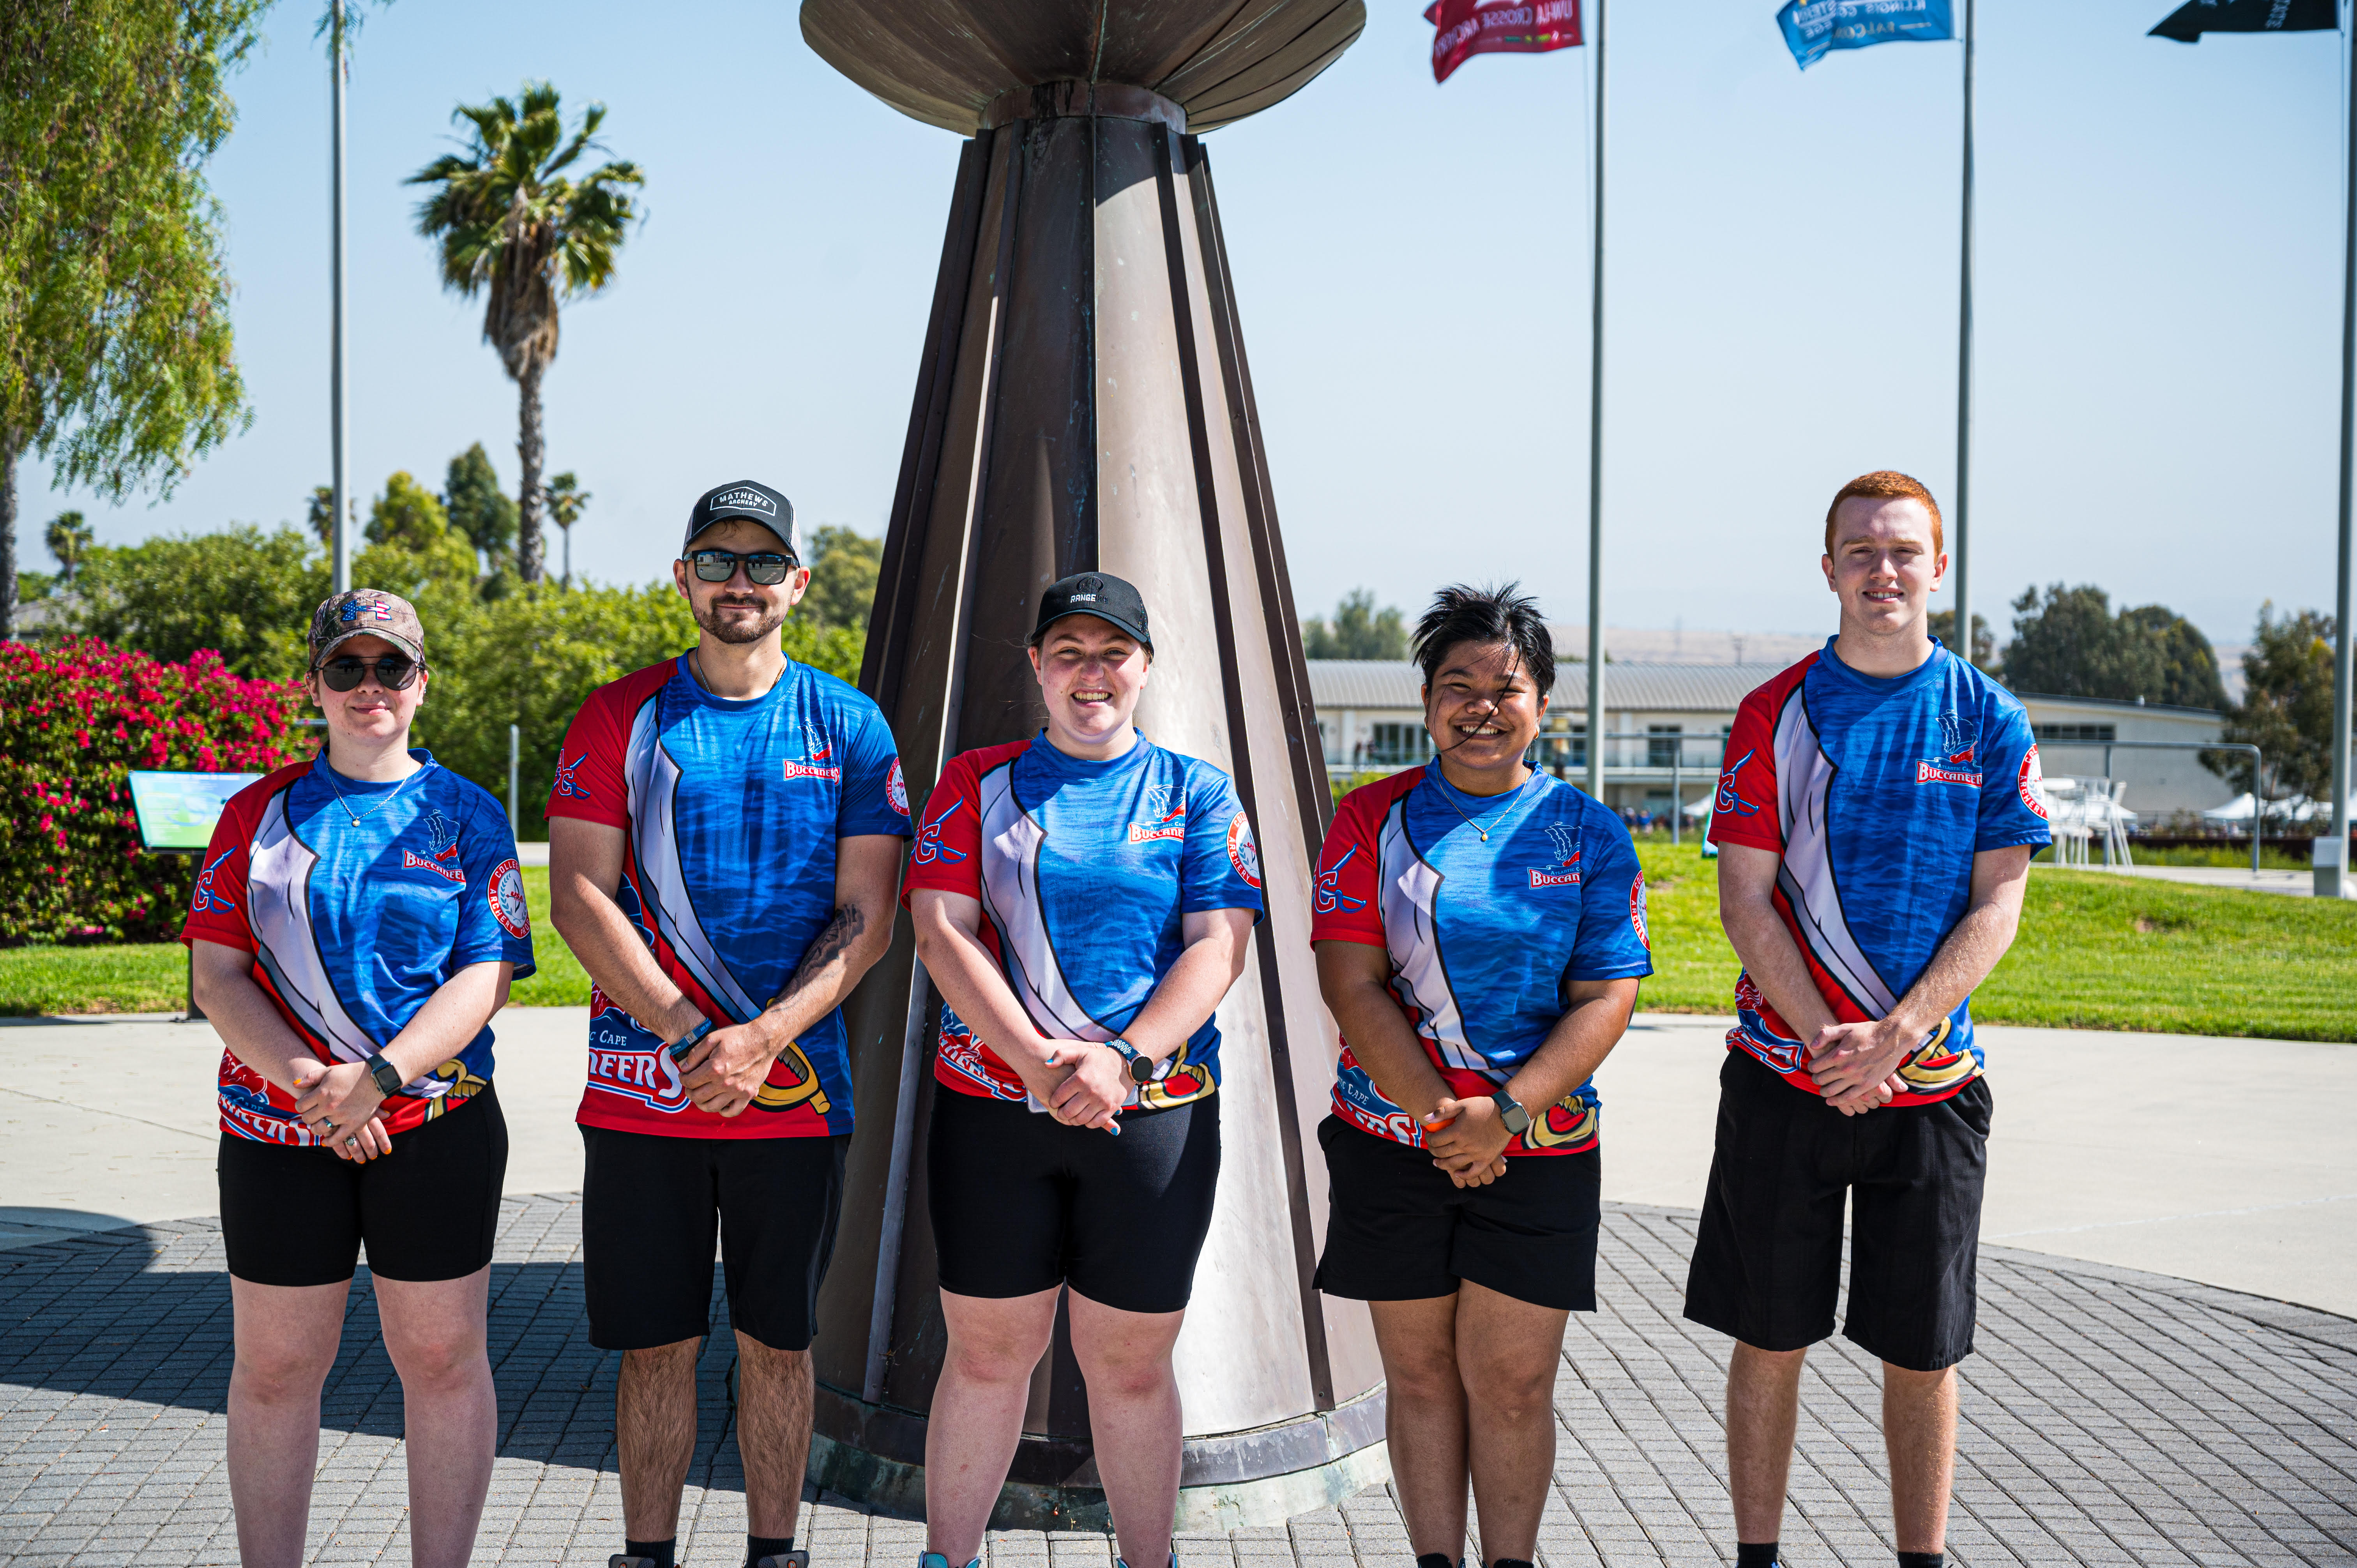 The Atlantic Cape Archery team at the USA Archery National competition in Chula Vista, California in late May.